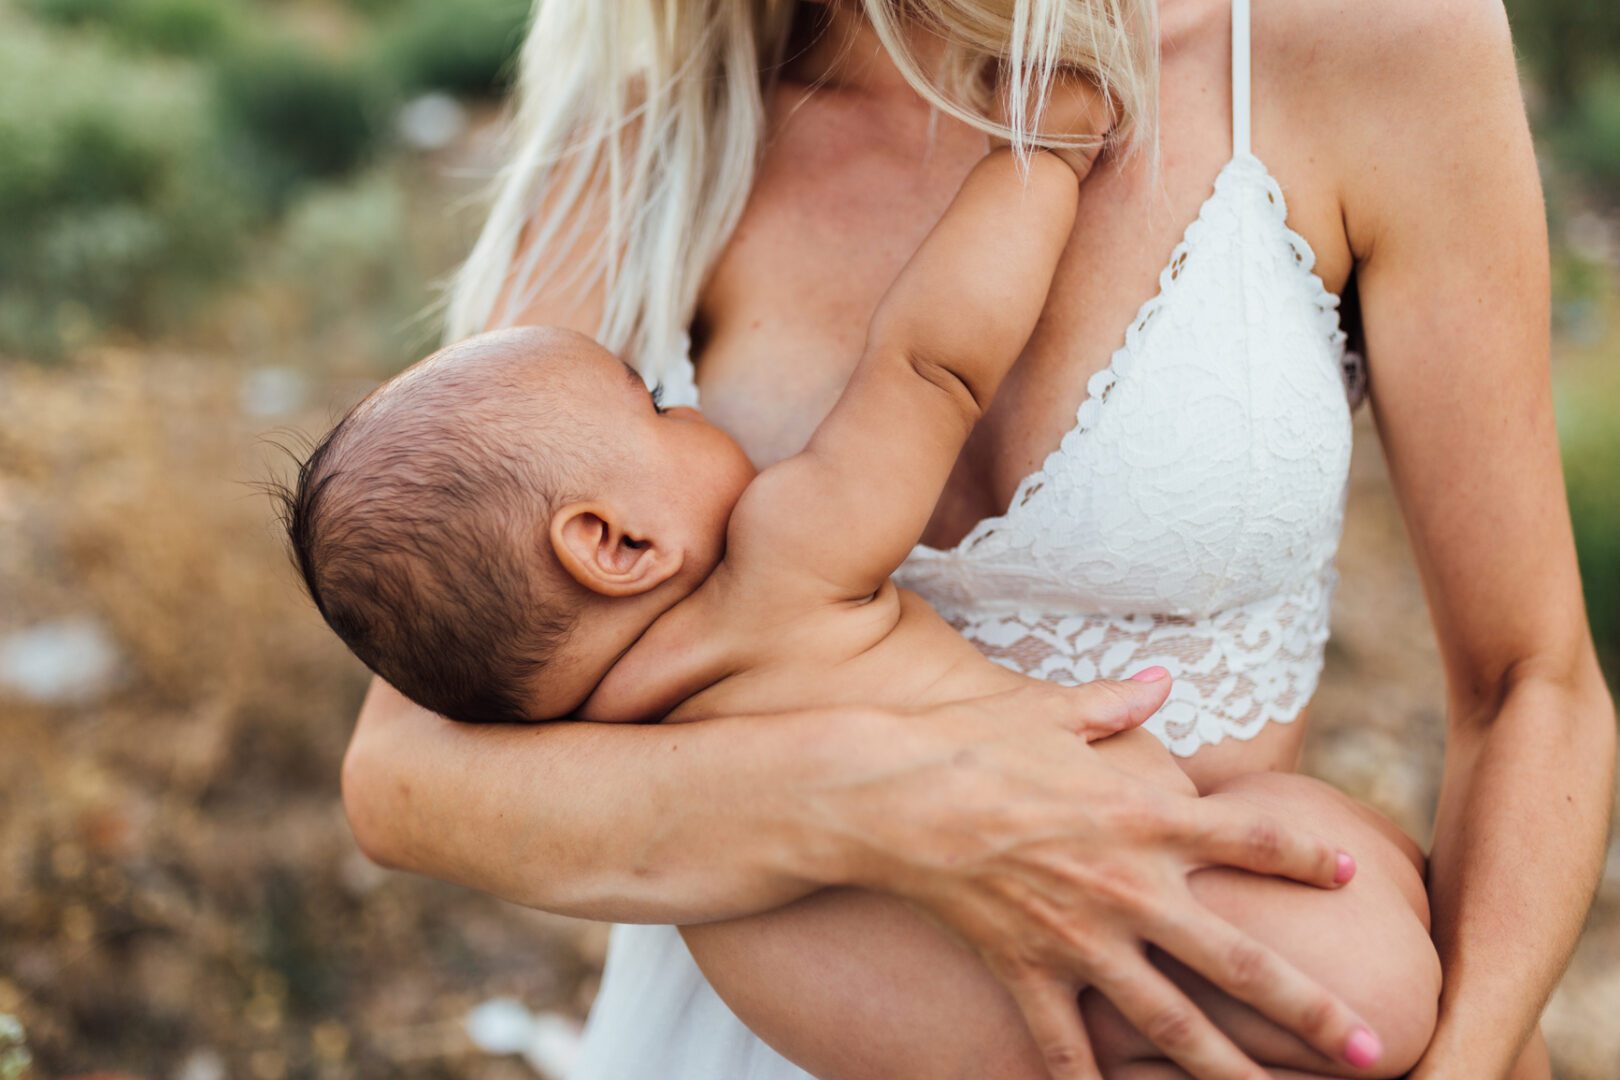 Young blond woman breastfeeding her mixed race baby. They are in the field one summer afternoon. She wears a white top and the baby is naked.